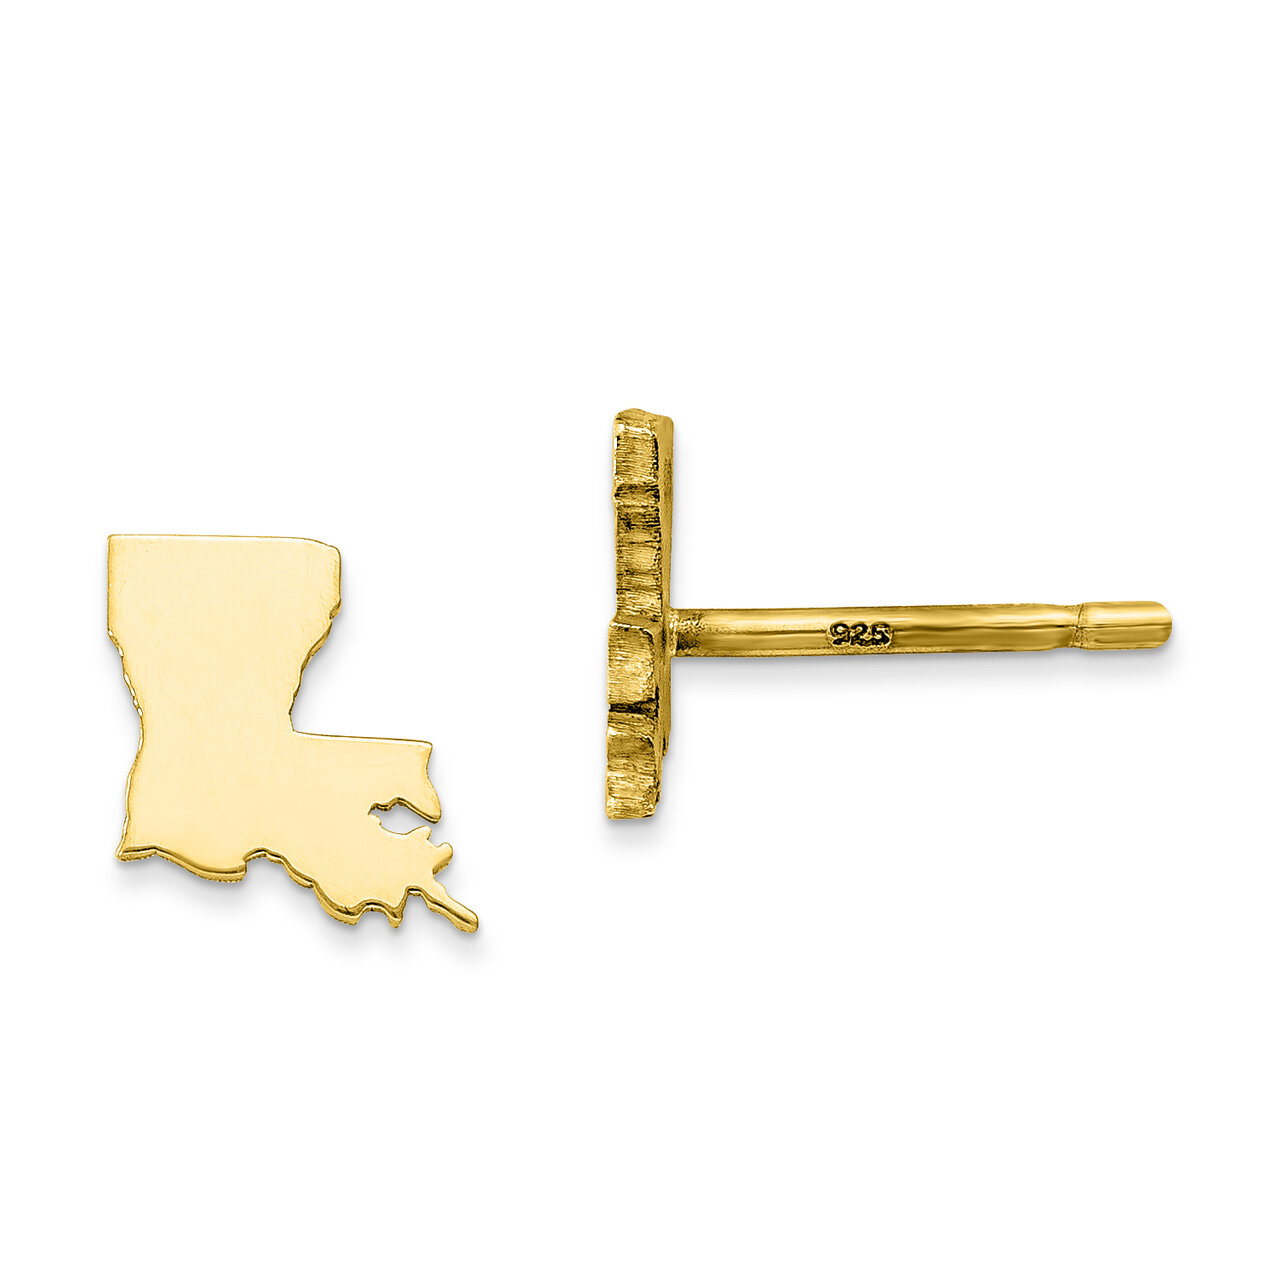 Louisiana Large State Earrings Gold-plated on Silver Engravable XNE48GP-LA